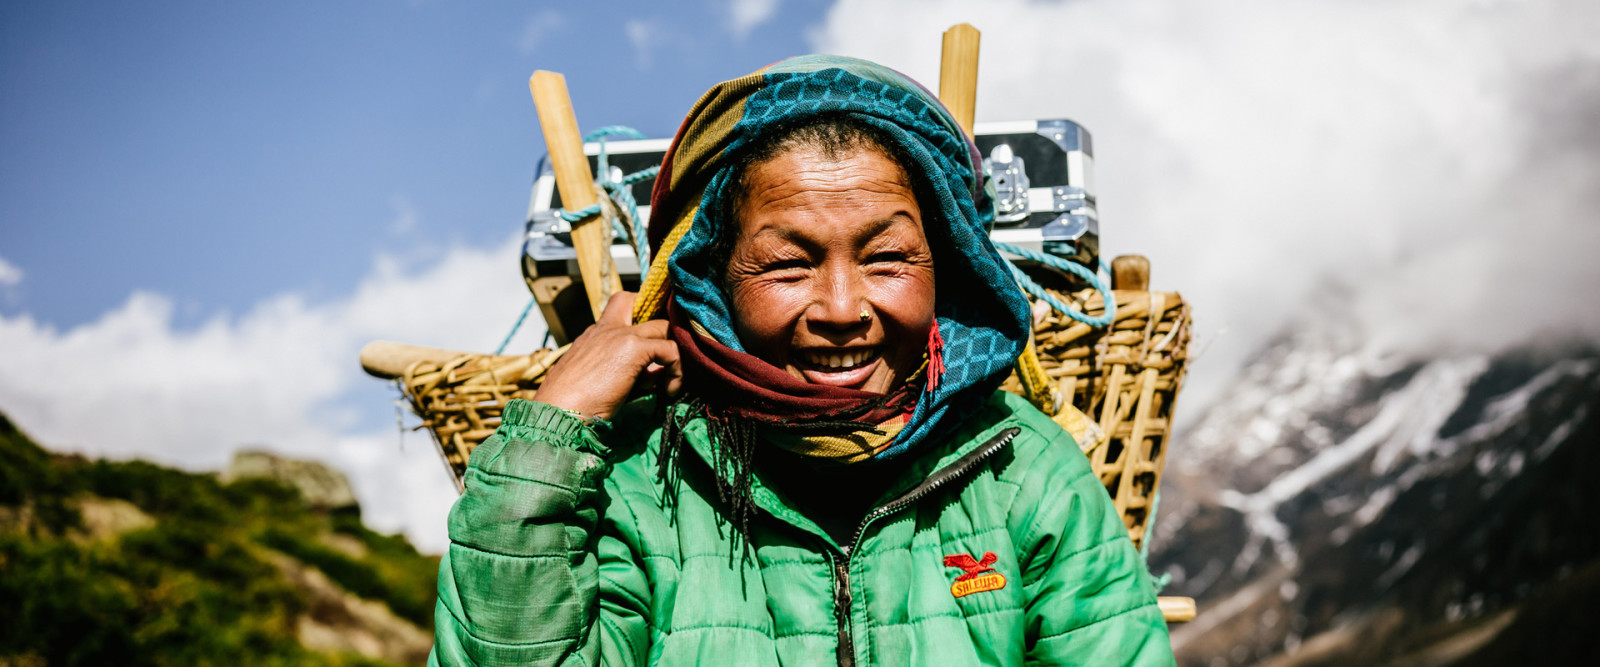 loved-by-all-the-story-of-apa-sherpa-1-1600x667